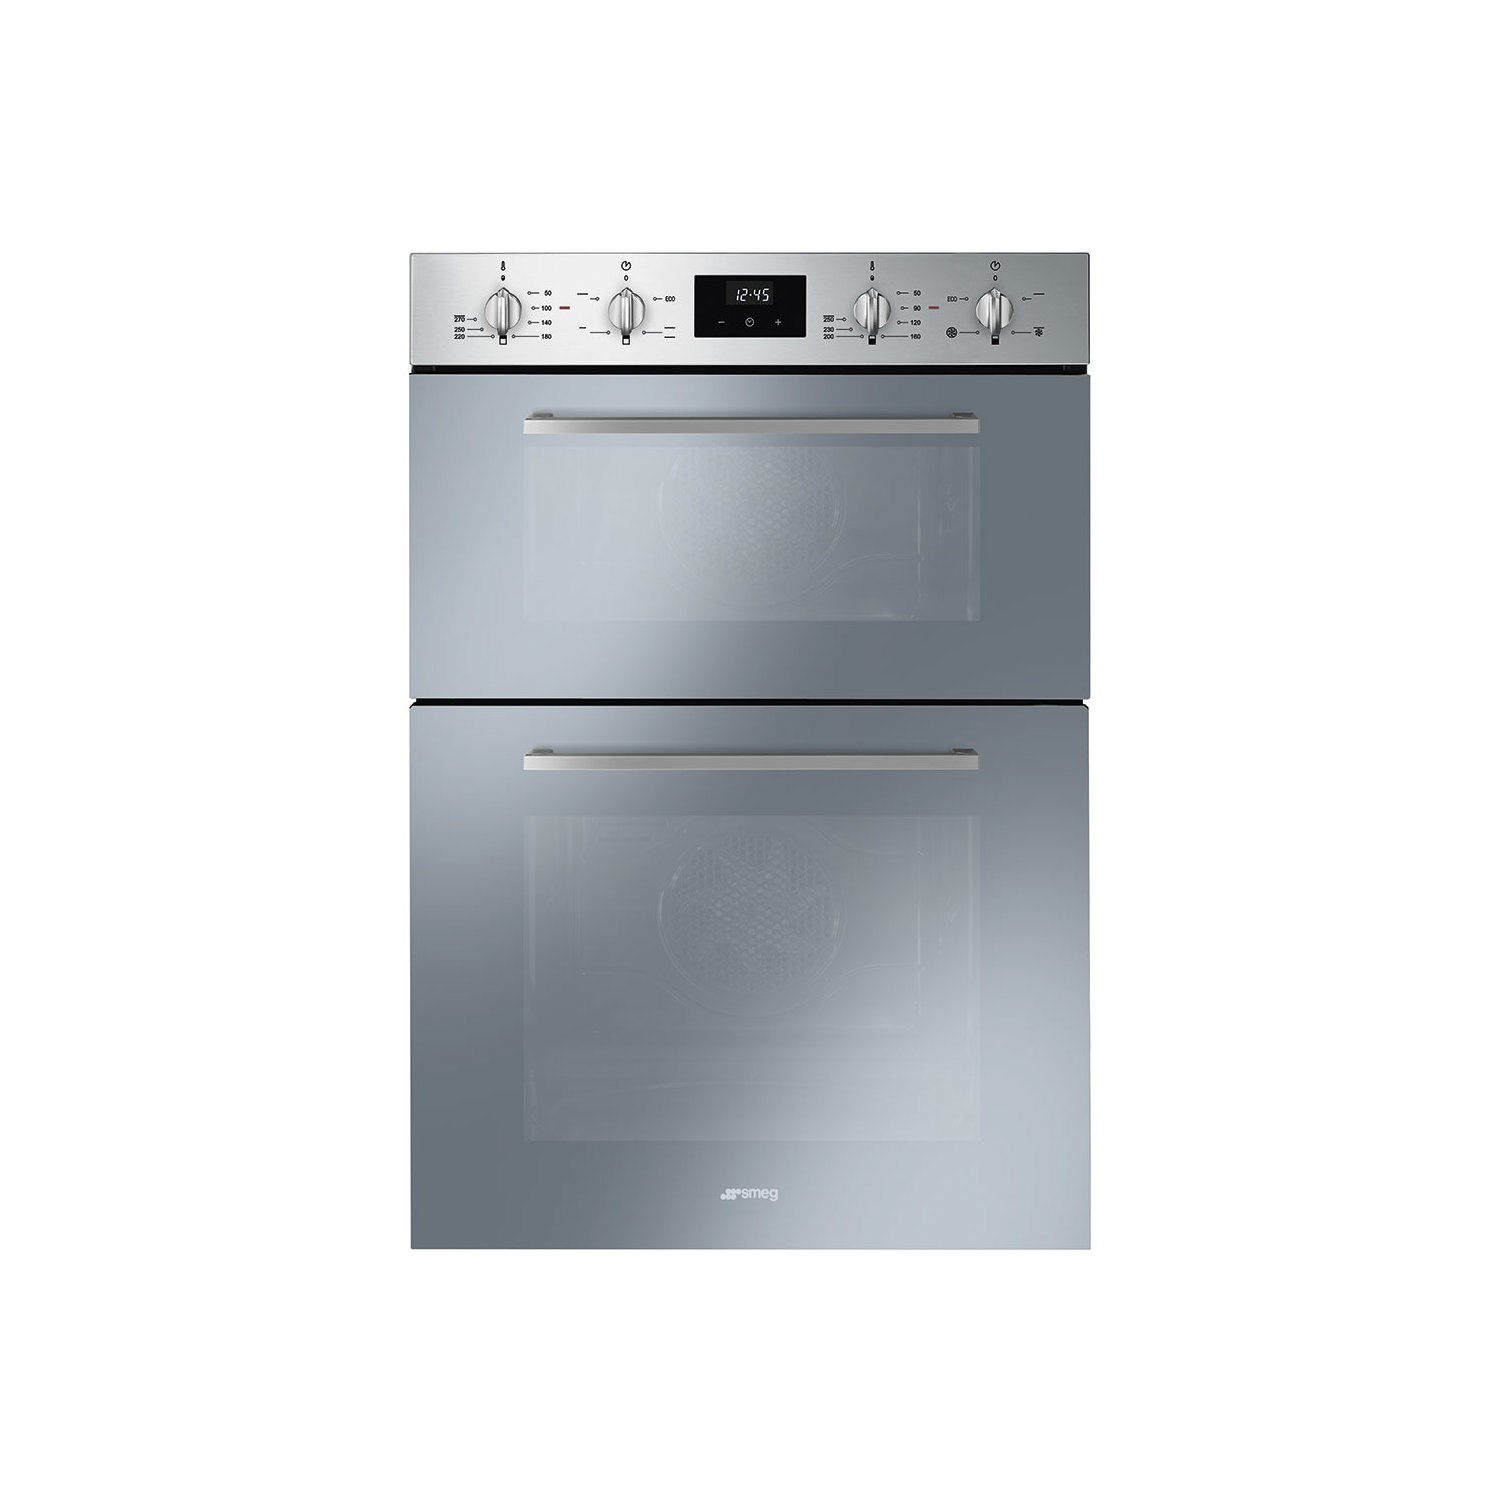 Smeg Cucina Electric Built In Double Oven - Stainless Steel